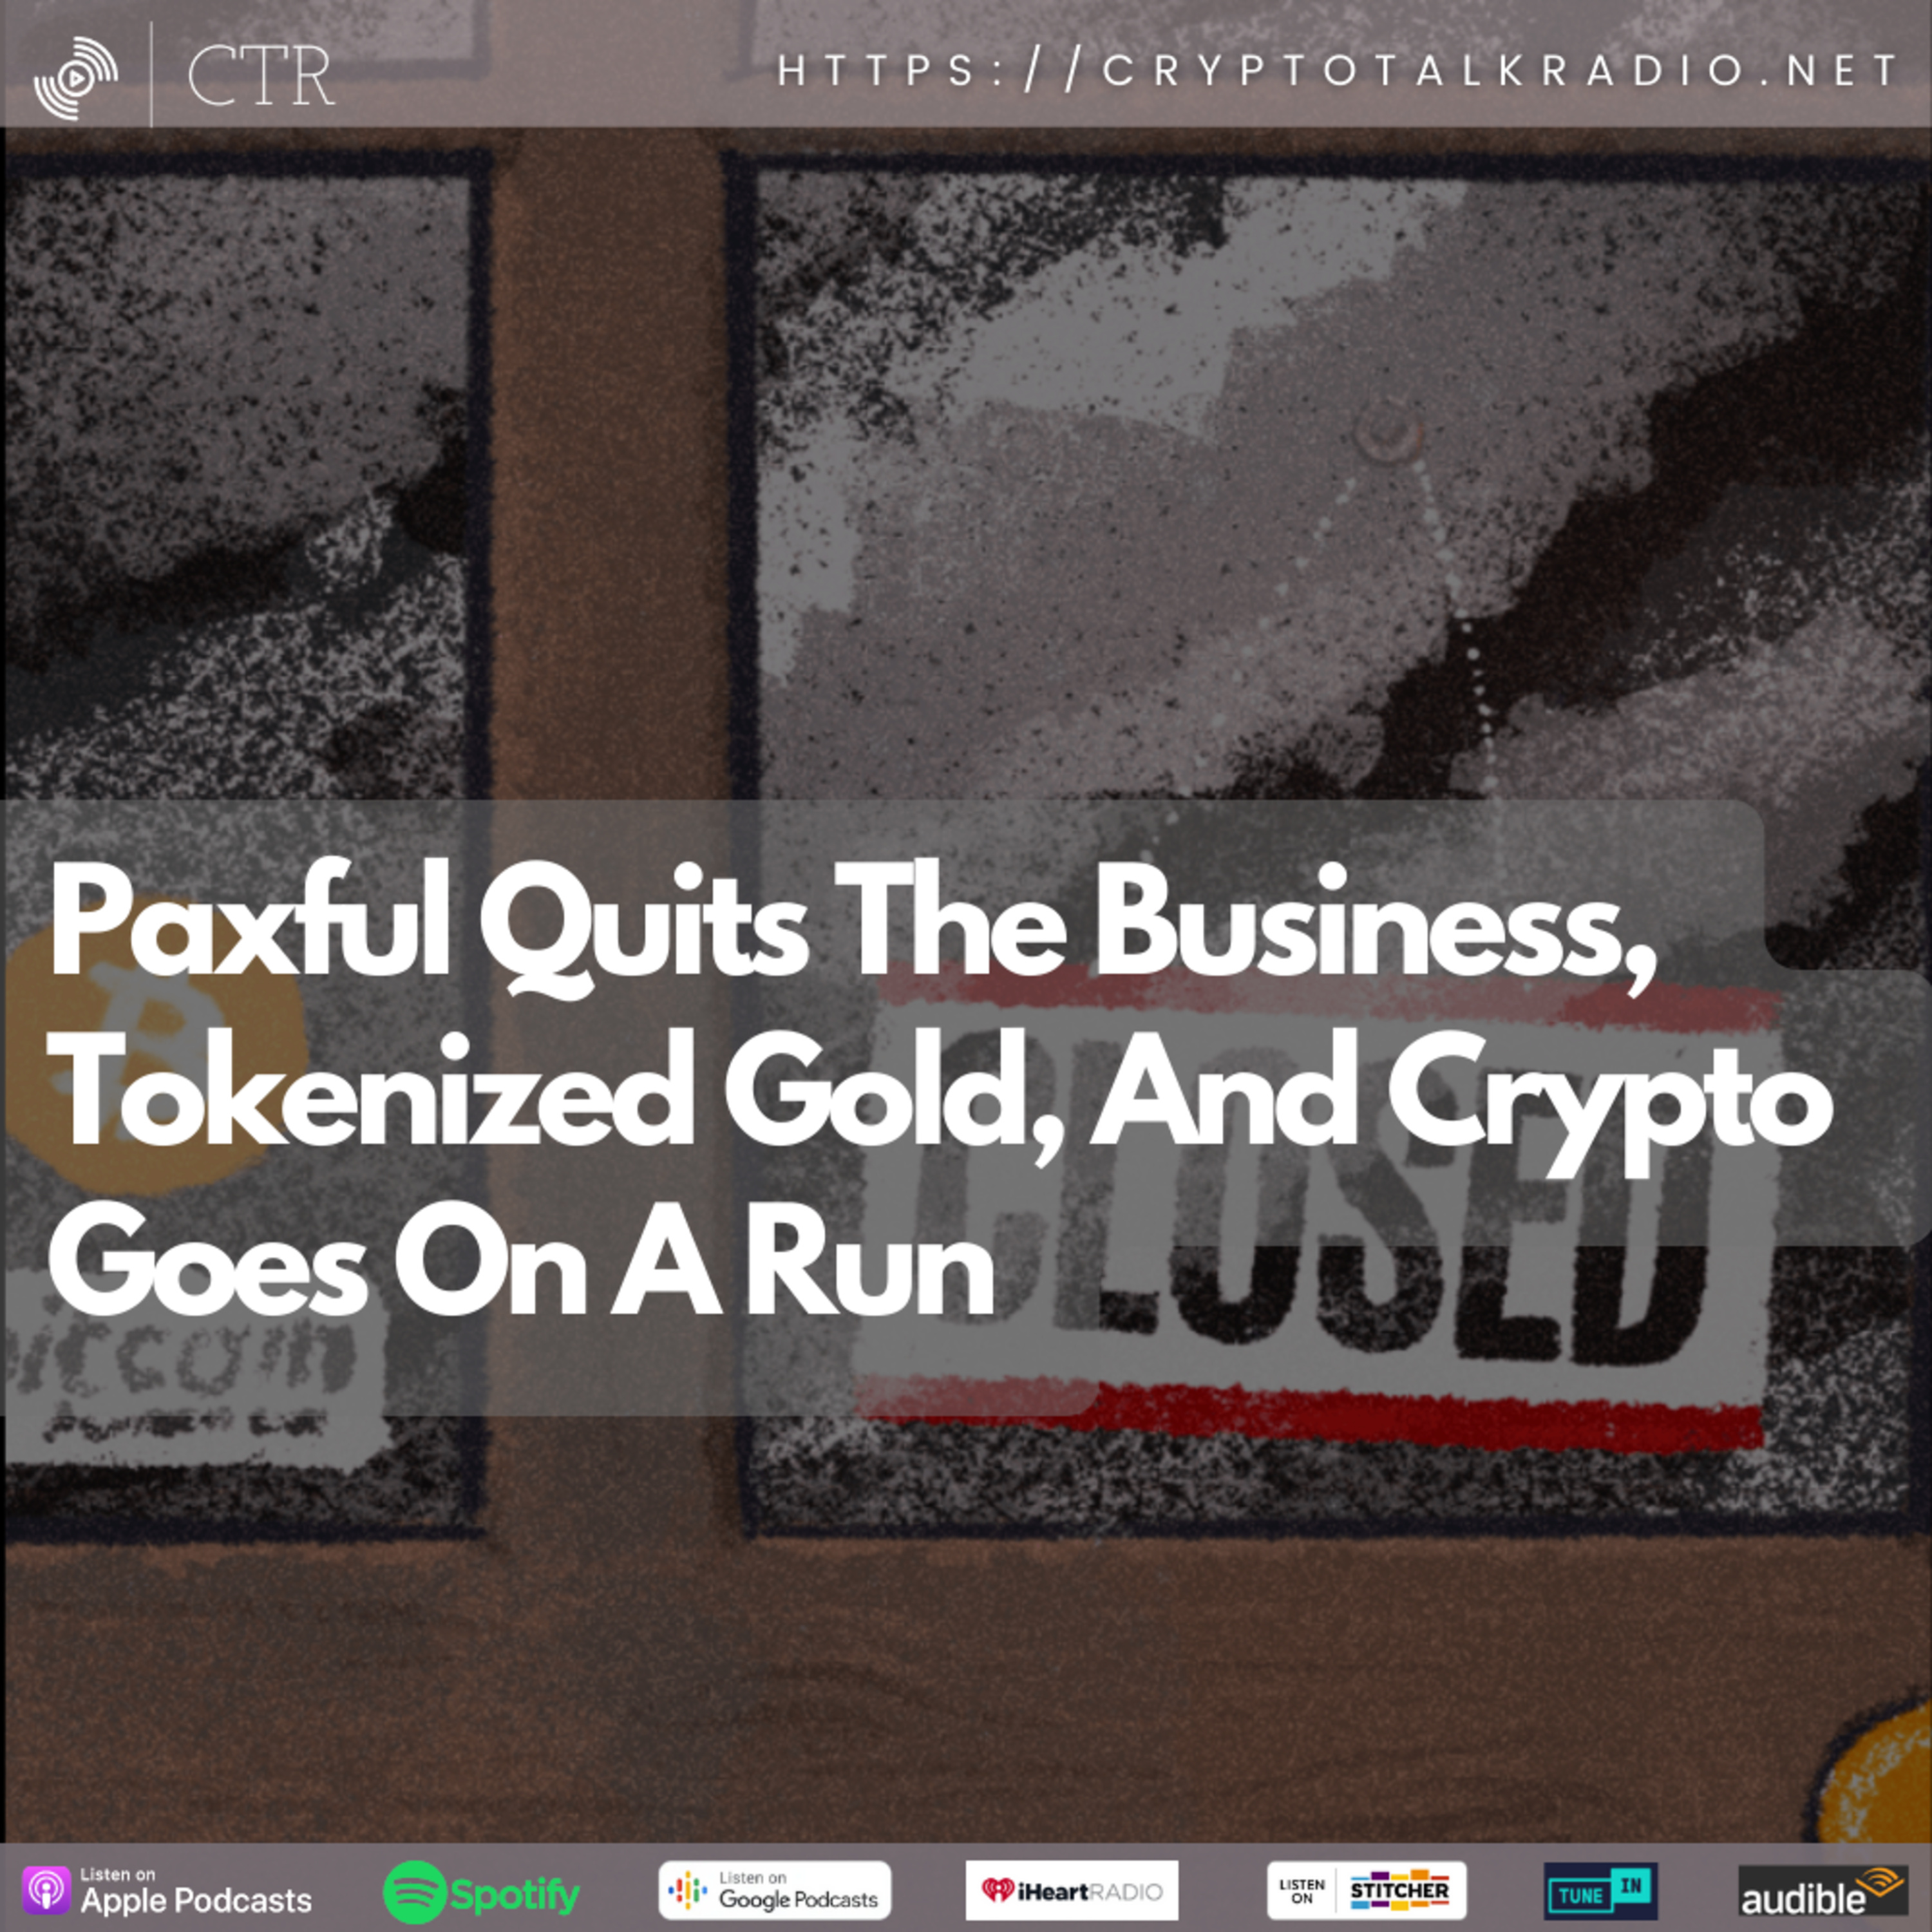 #Paxful Quits The Business, Tokenized Gold, And Crypto Goes On A Run